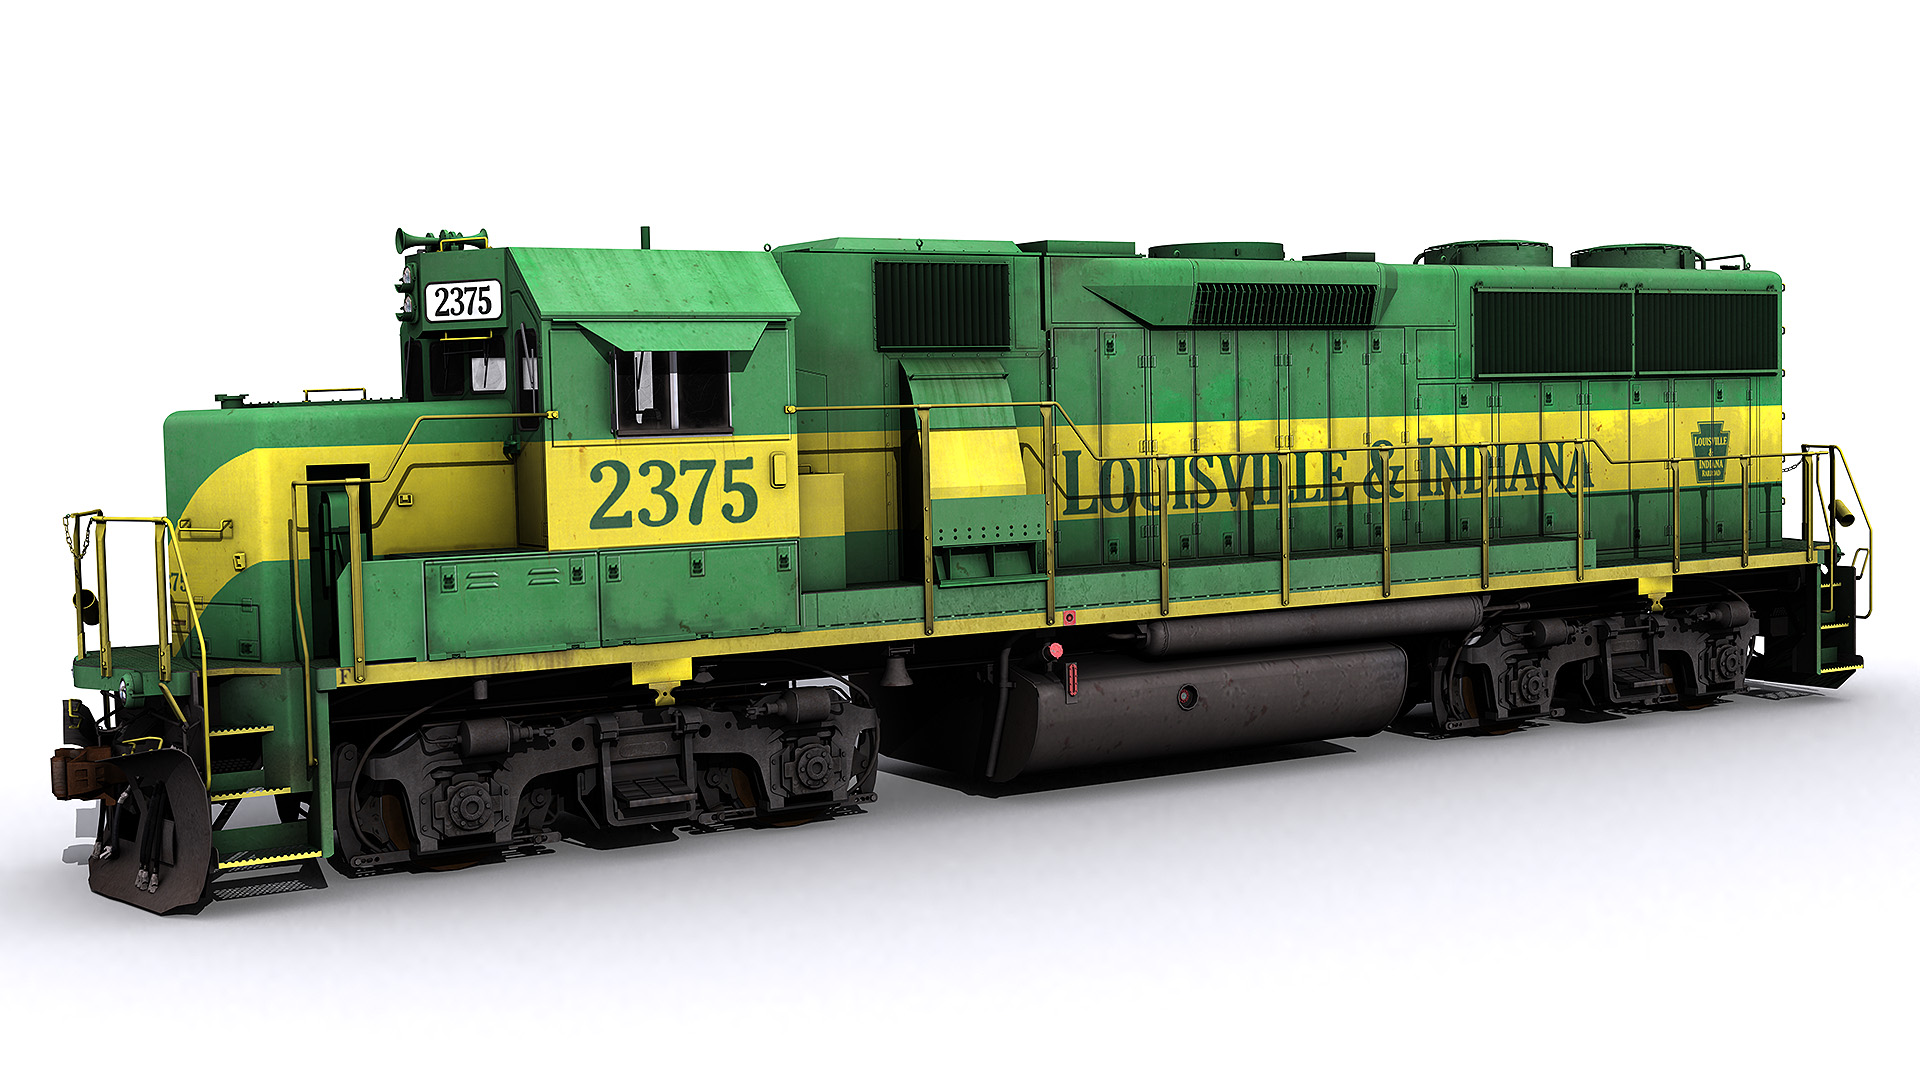 The green powerful, scaled and digital rail engine